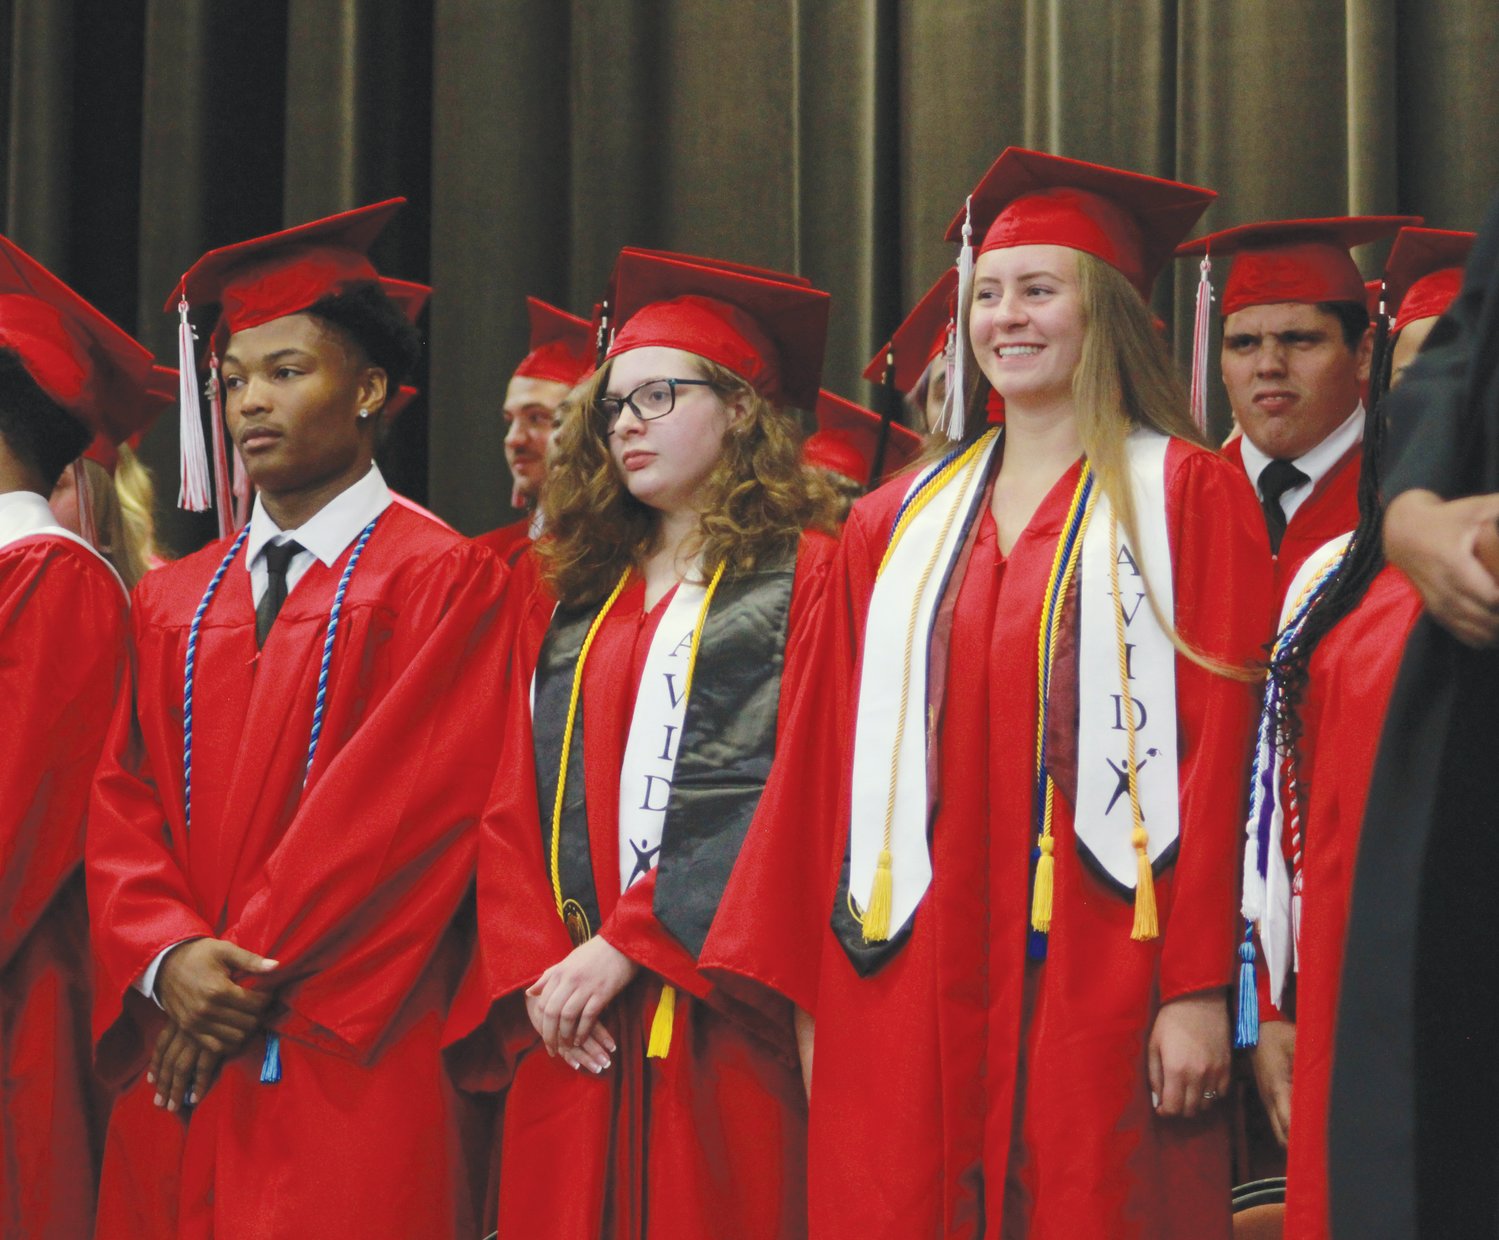 Seniors of the Chatham Central High School graduating class of 2022 make their way on stage to their seats before graduation on Friday at the Dennis A. Wicker Civic Center in Sanford.